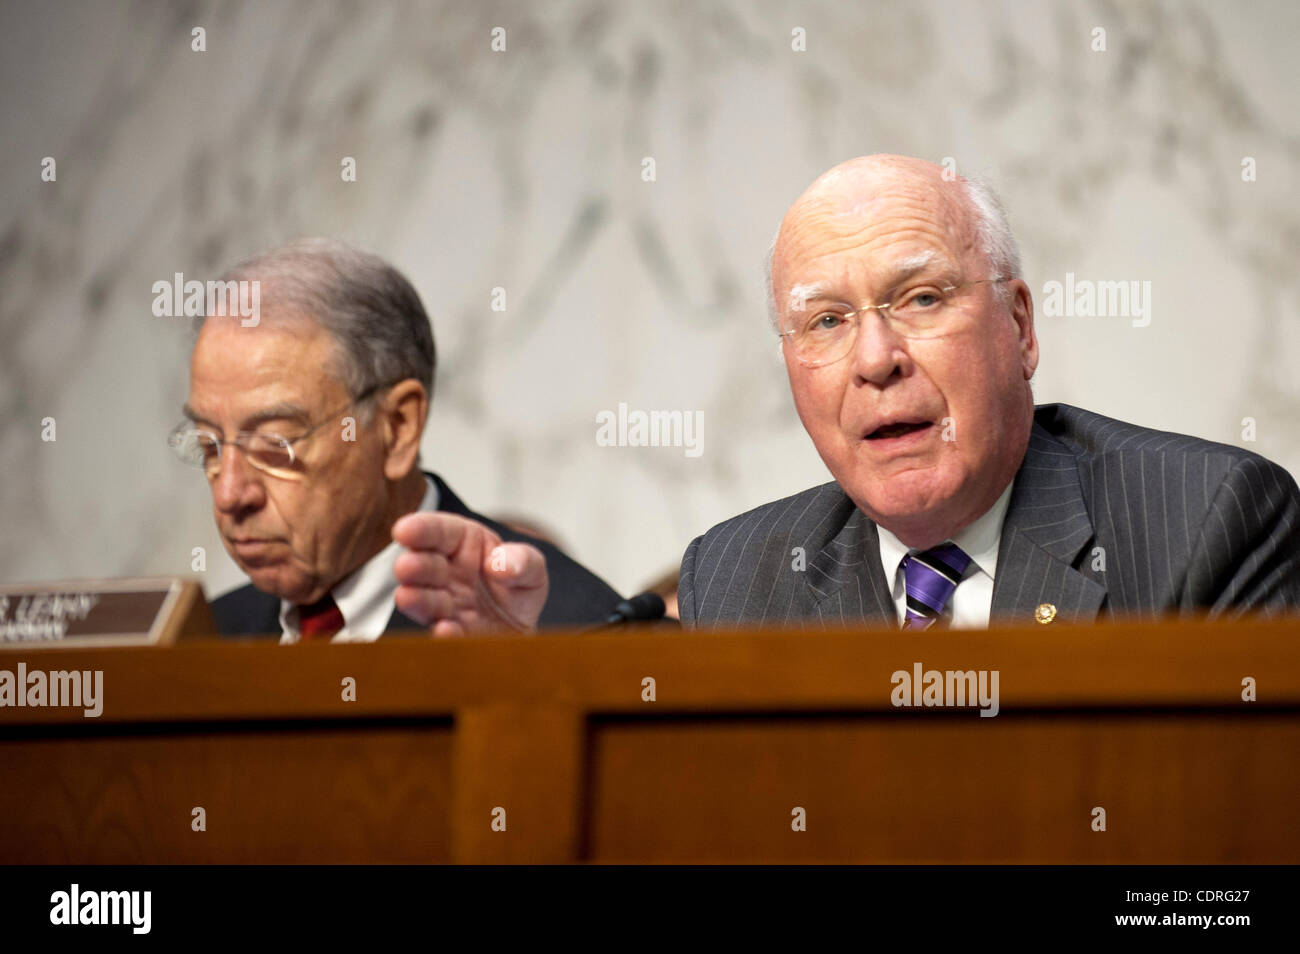 July 20, 2011 - Washington, District of Columbia, U.S. - Senator PATRICK LEAHY (D-VY) makes his opening statement during a Senate Judiciary Committee hearing on the ''Respect for Marriage Act: Assessing the Impact of DOMA (Defense of Marriage Act) on American Families,'' to repeal DOMA and restore t Stock Photo